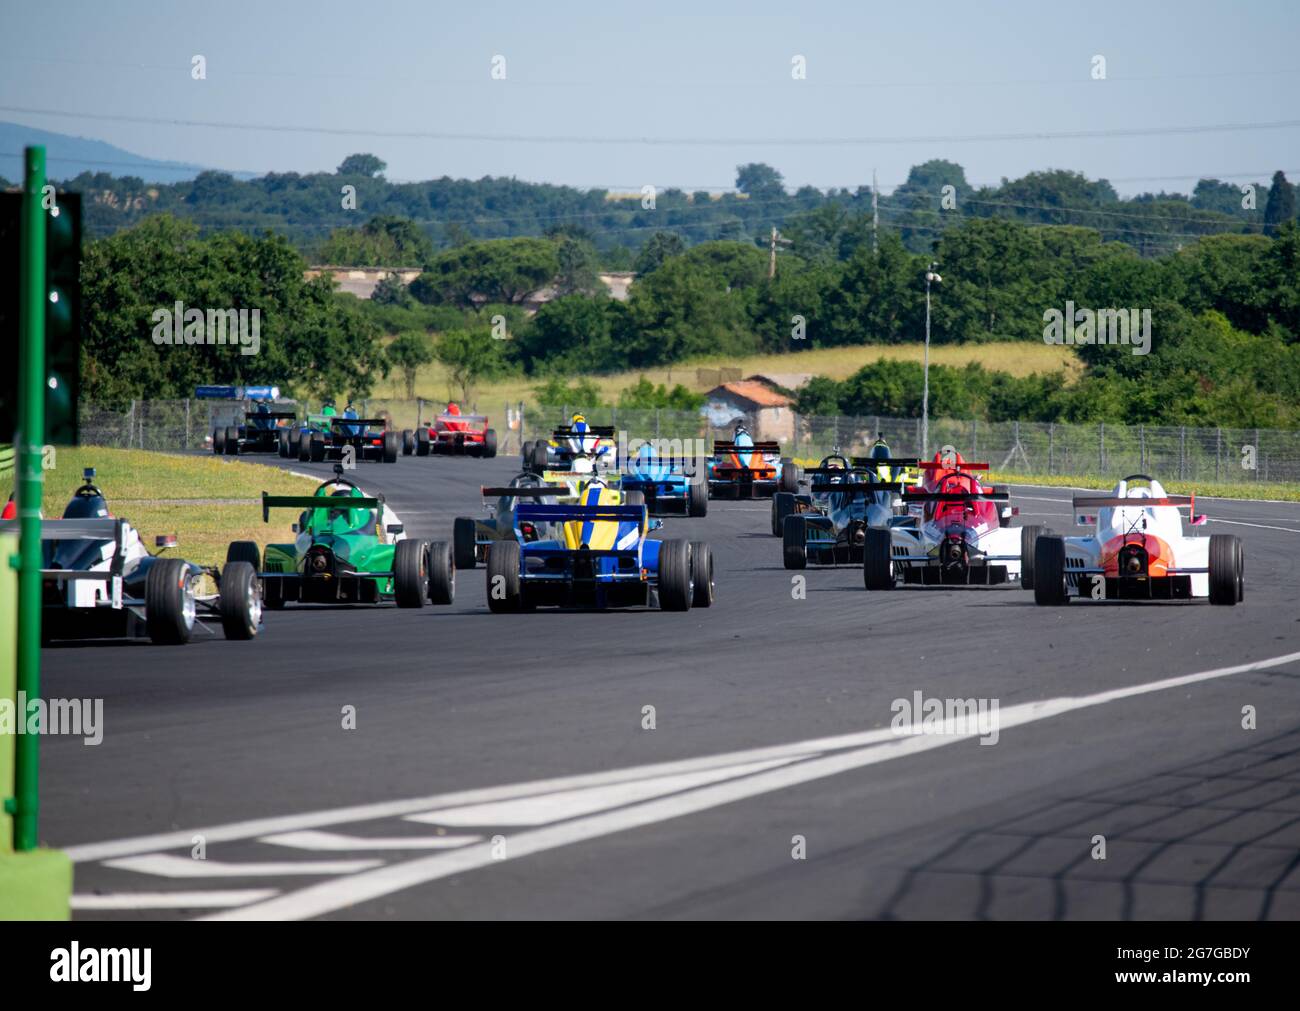 Vallelunga June 13 2021, Fx series racing. Formula cars group action rear view after race start on asphalt track circuit Stock Photo